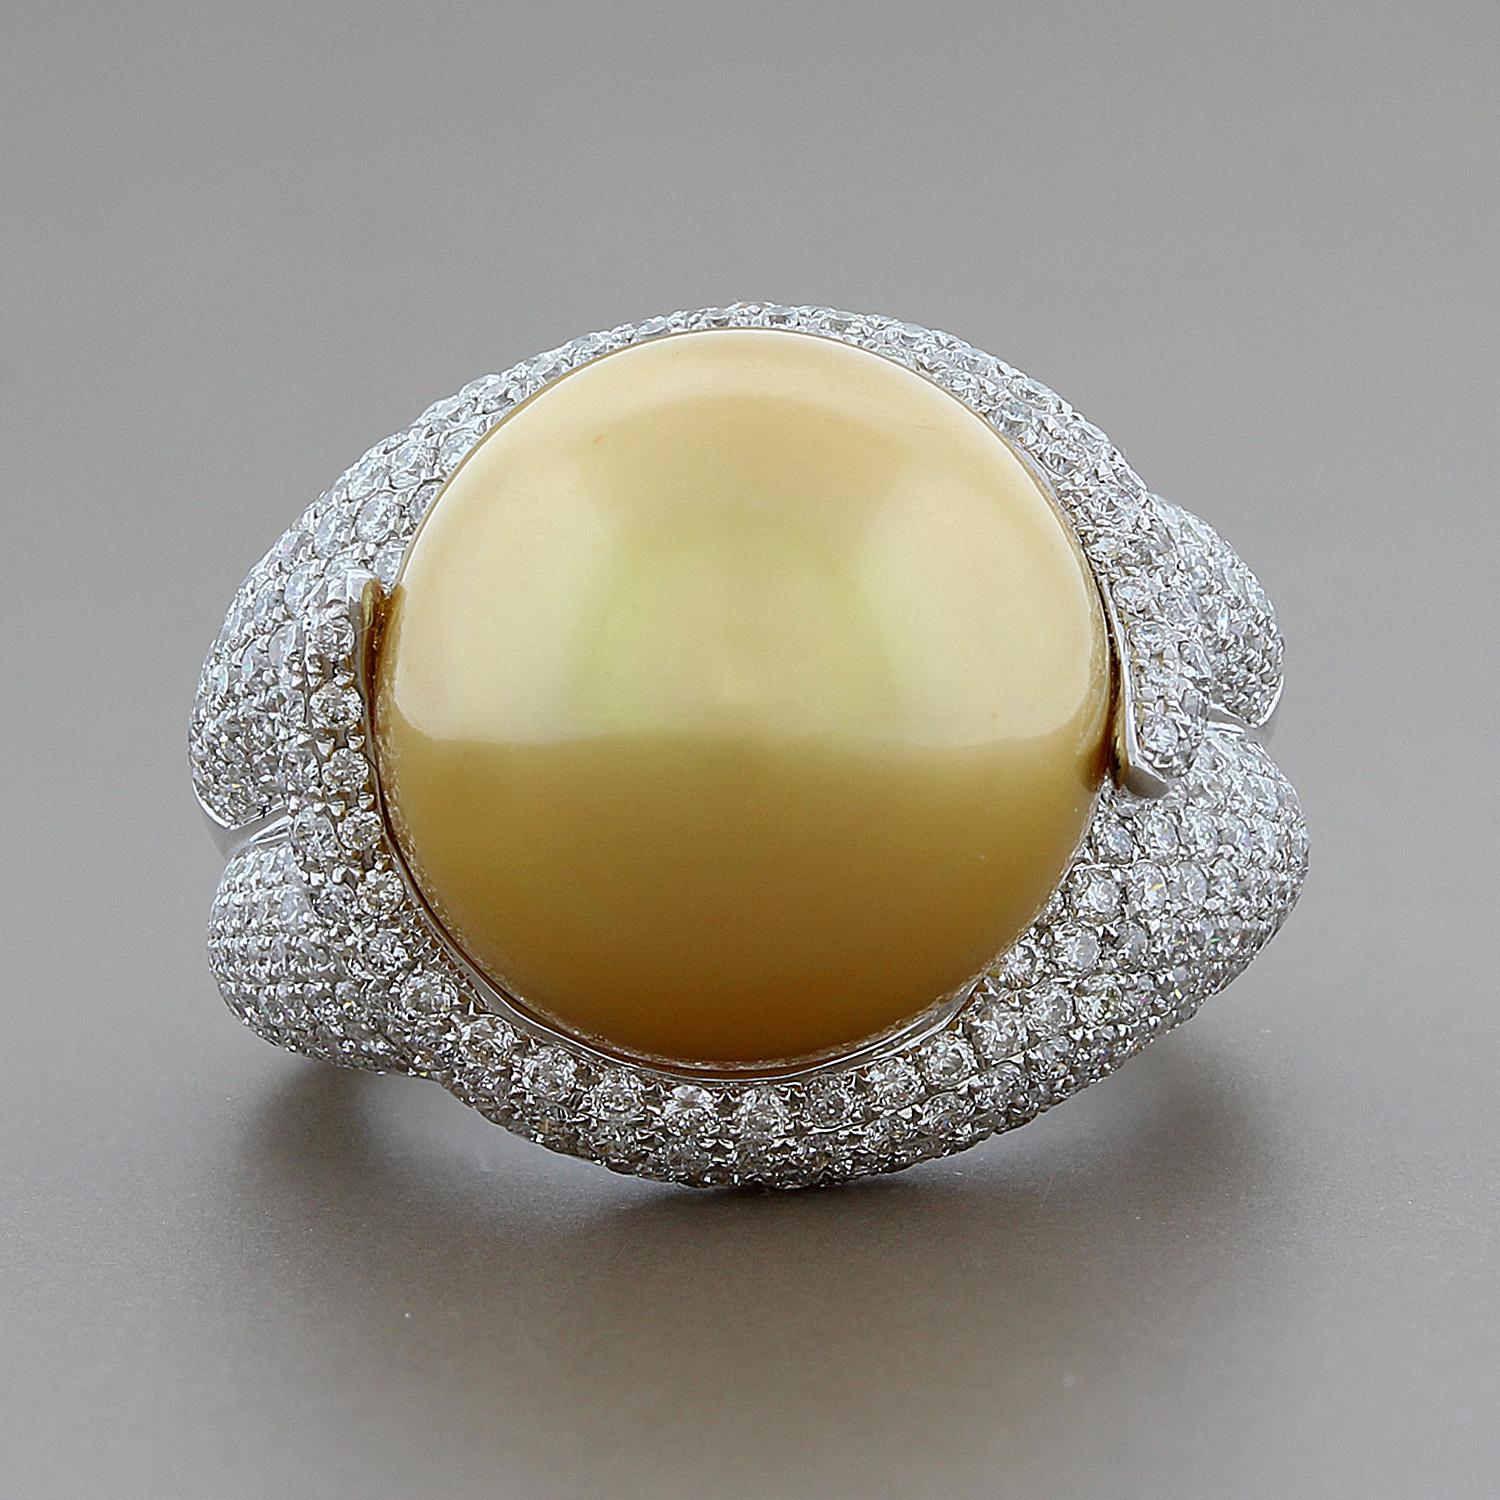 A diamond gold ring featuring a lustrous golden South Sea pearl measuring 15mm, just about the largest they come! The gold ring is covered with 2.29 carats of fine VS quality round cut diamonds, set in 18K white gold. 
Size 6 ¾ 
